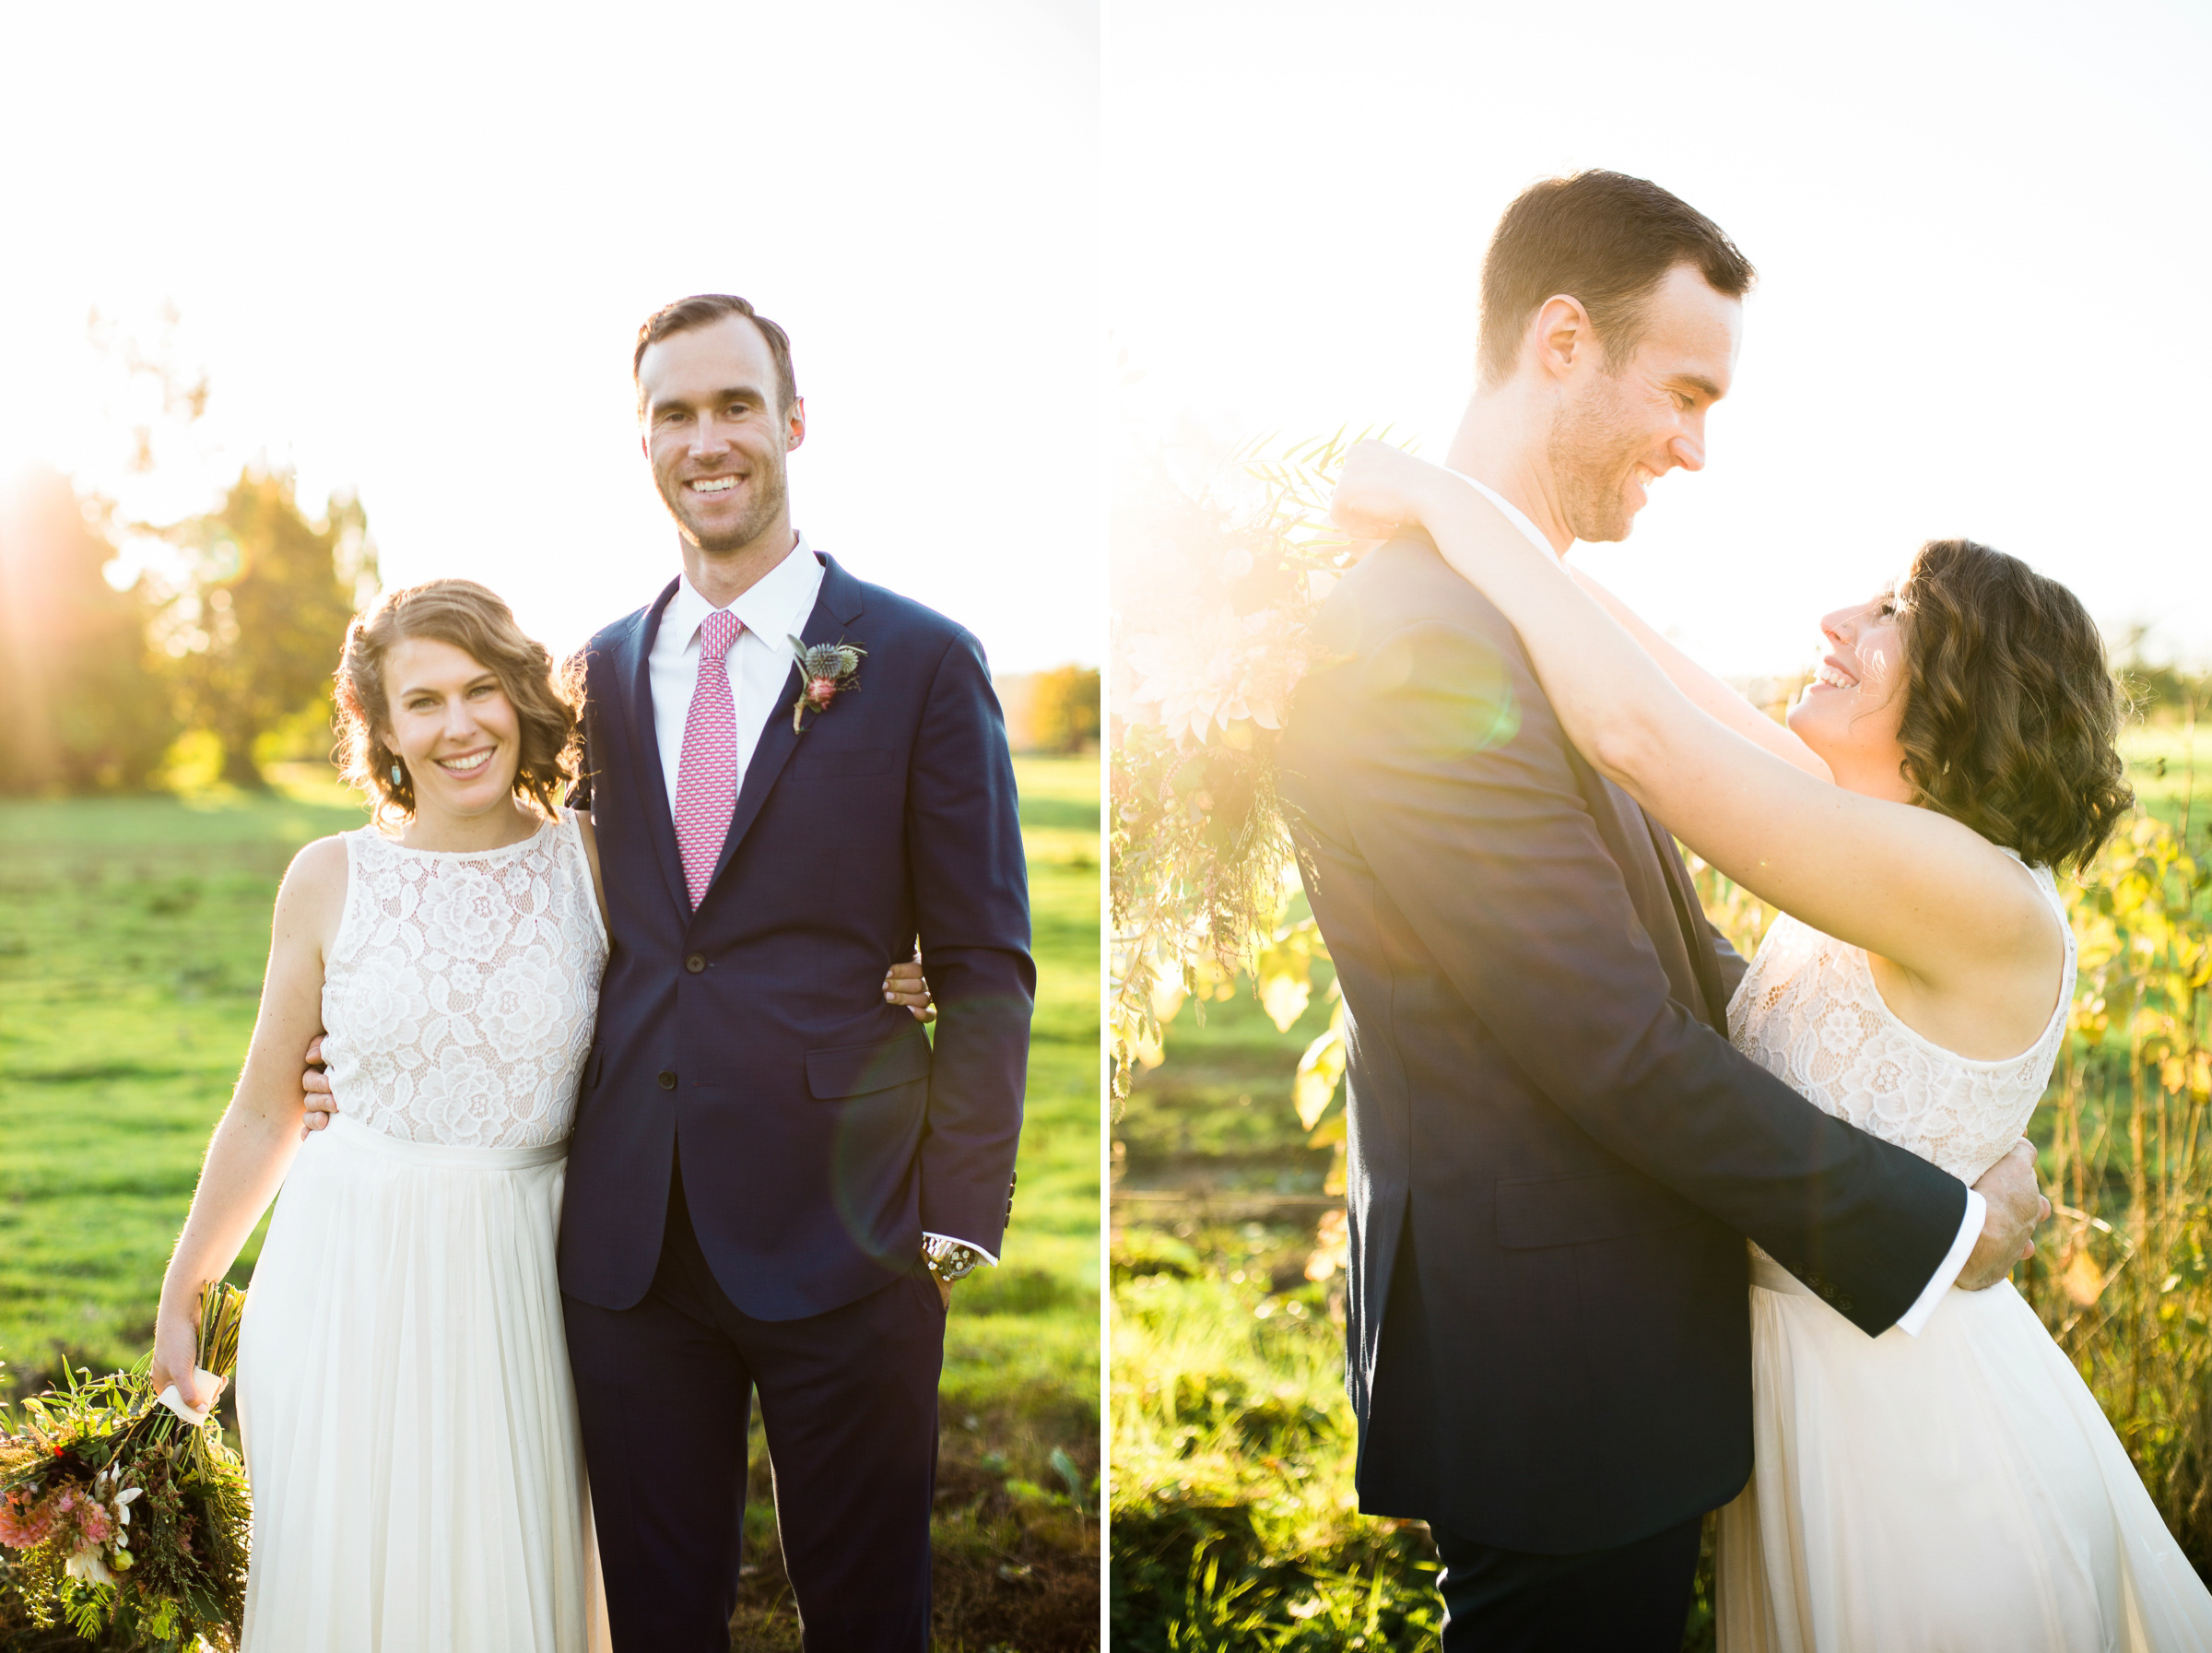 21-the-Fields-at-Willie-Greens-Wedding-Venue-Seattle-Photographer-bride-groom-sunset-portraits-Photography